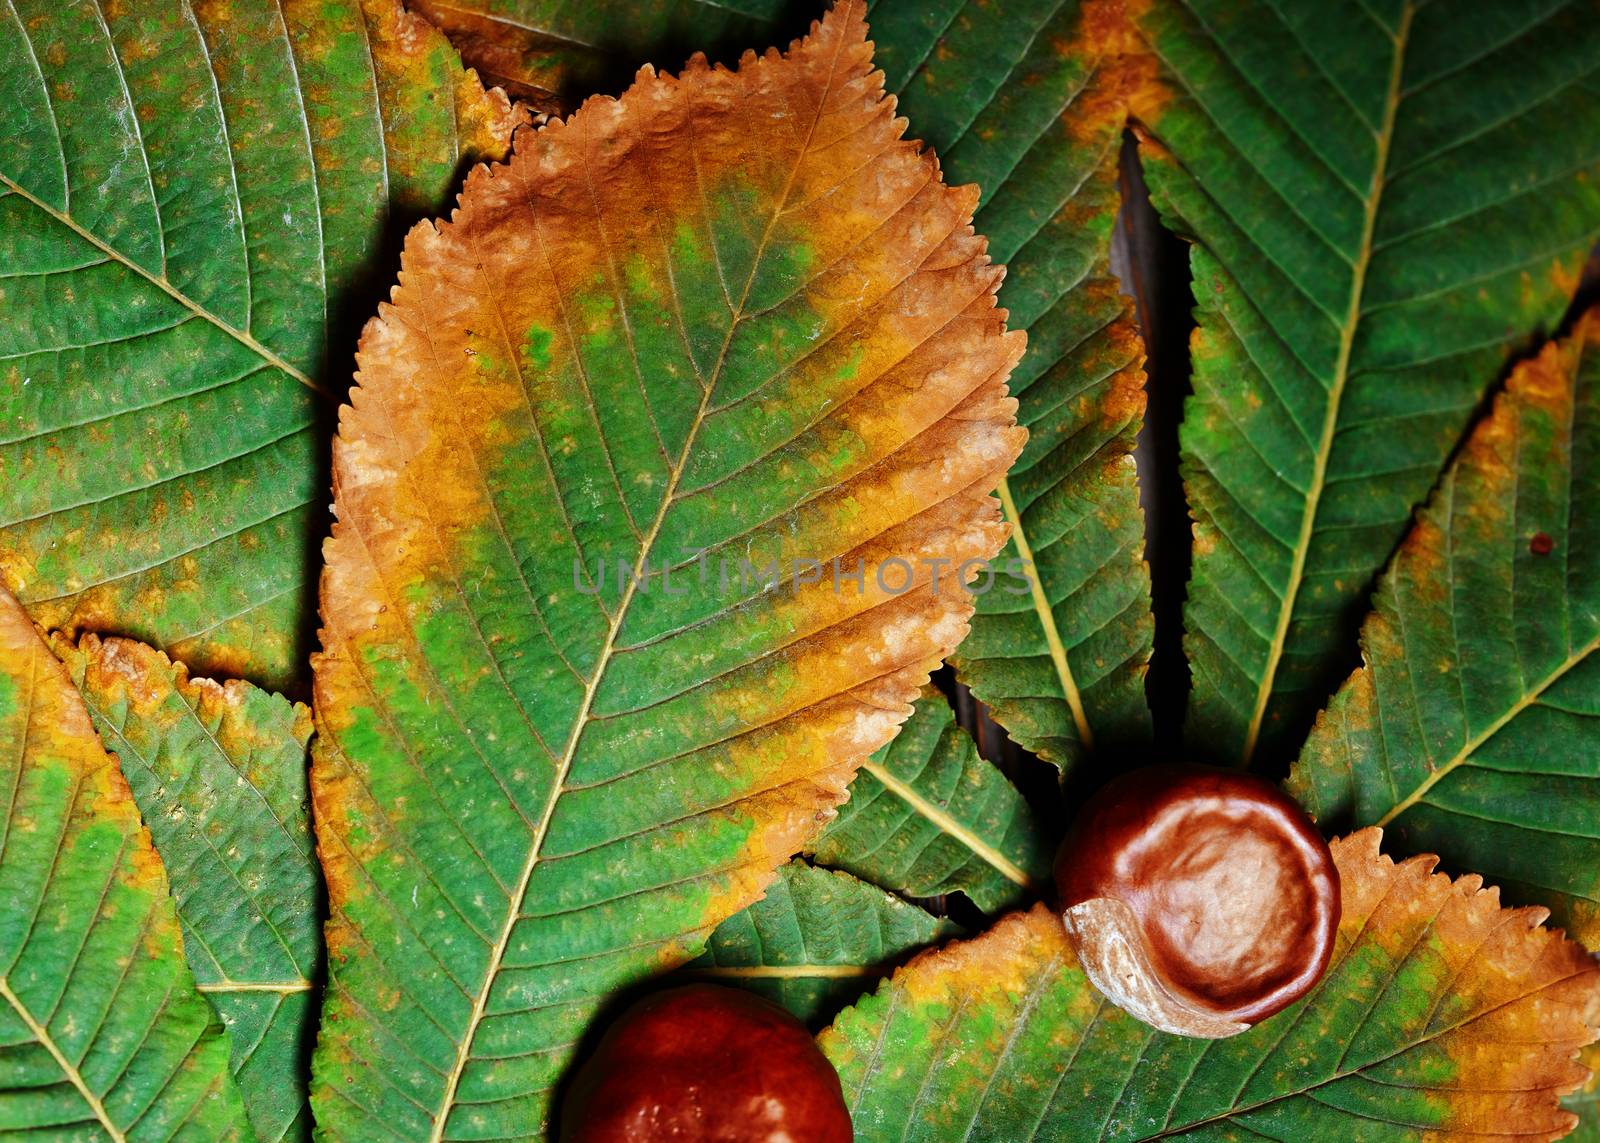 Chestnuts on the leaf. Close-up by Novic